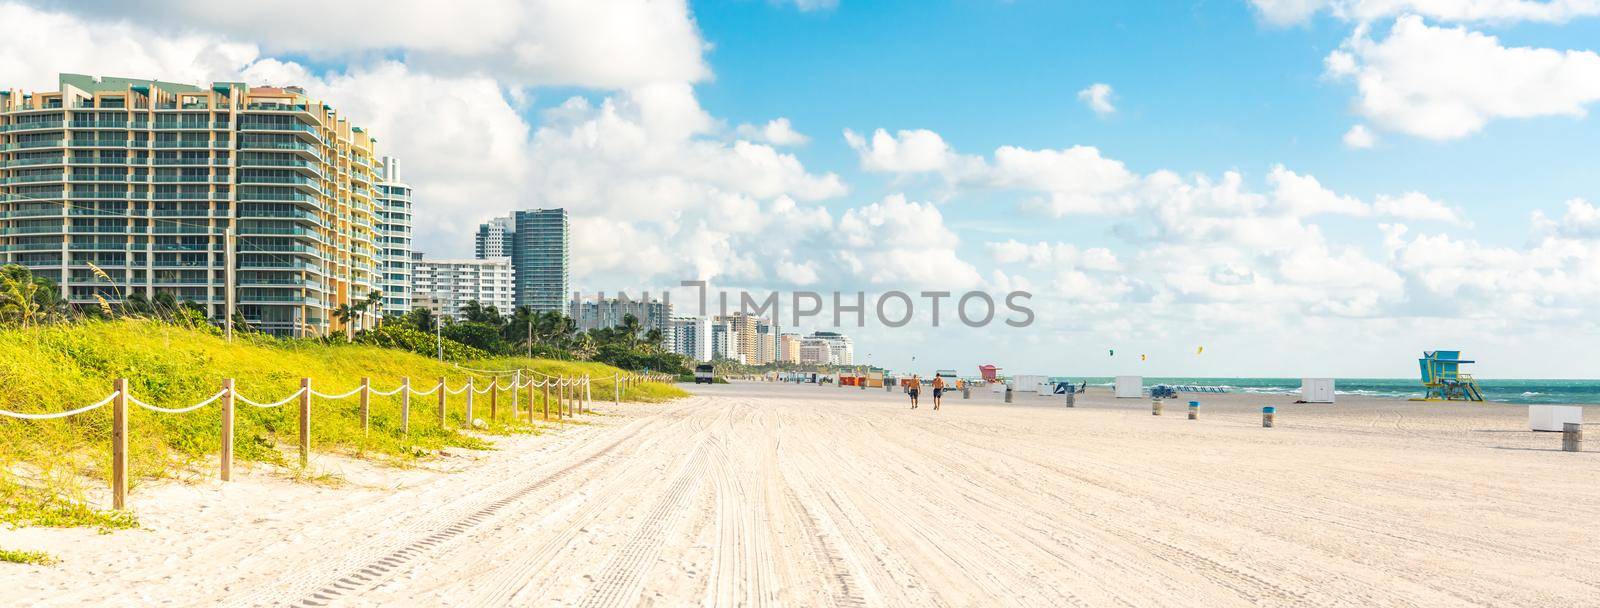 Wide South Beach in Miami, Florida with grass and buildings by Mariakray